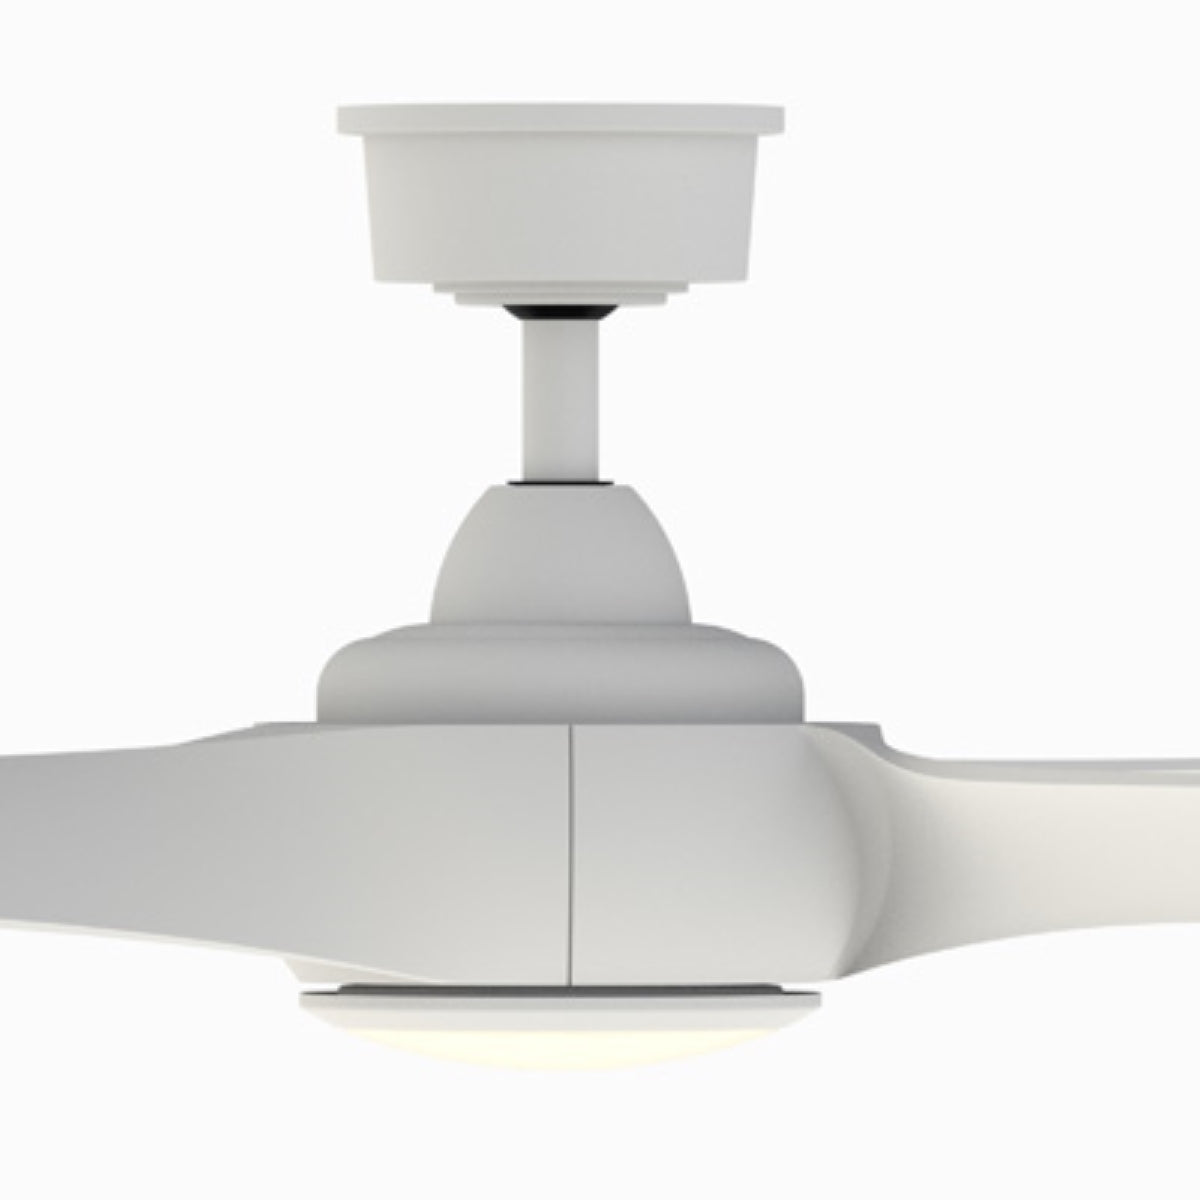 Wrap Custom Indoor/Outdoor Ceiling Fan Motor With Remote, 64-84" Blades Sold Separately - Bees Lighting